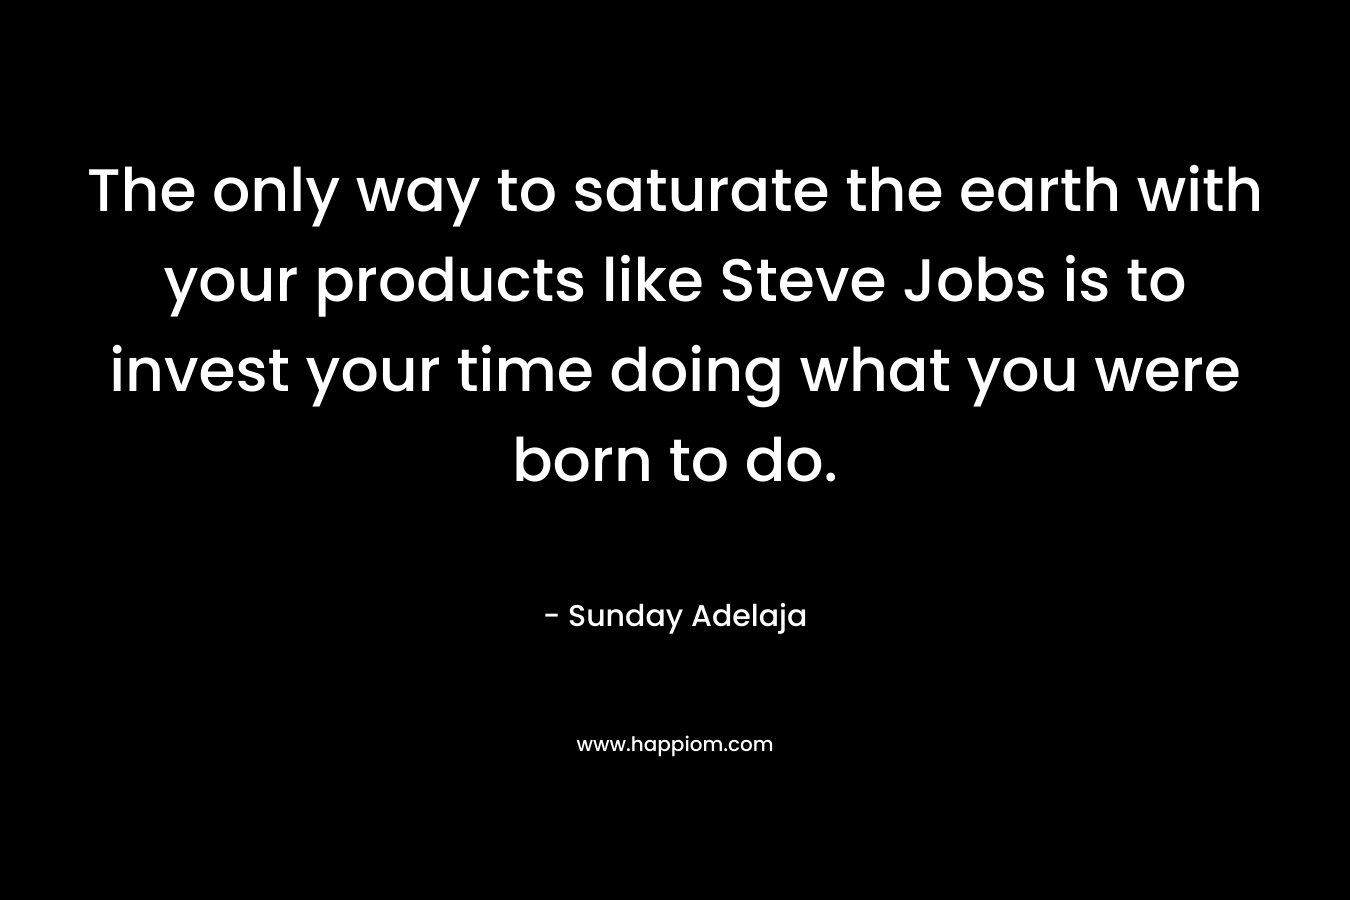 The only way to saturate the earth with your products like Steve Jobs is to invest your time doing what you were born to do.